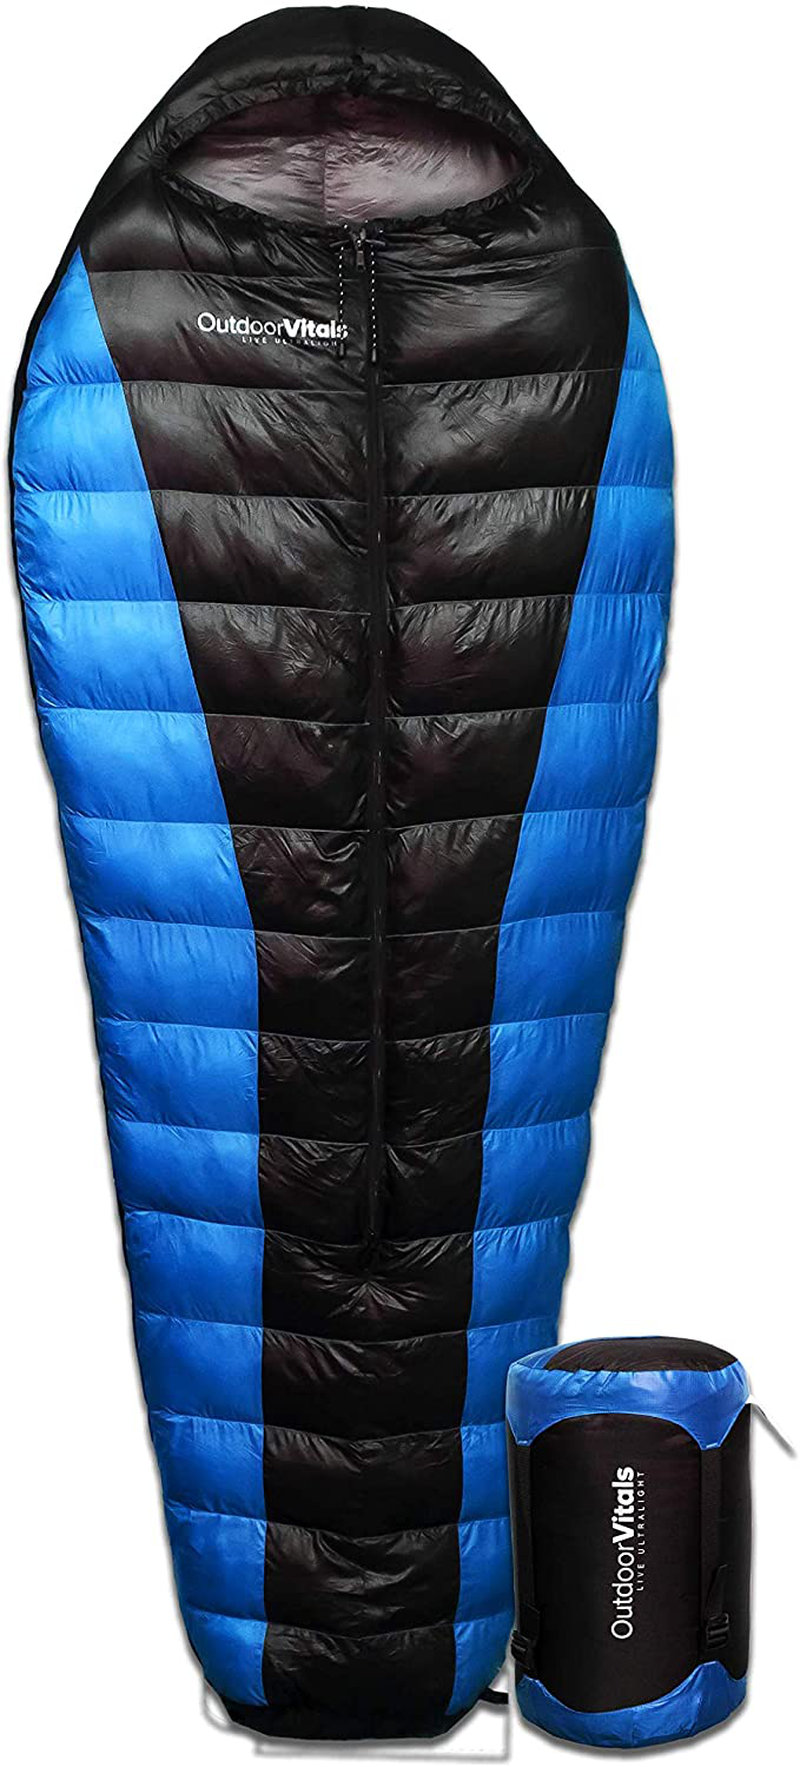 Outdoor Vitals Atlas 0-15 - 30 Degree F 650+ Fill Power Starting under 3 Lbs. Ultralight Backpacking Mummy down Sleeping Bag for Lightweight Hiking & Camping Sporting Goods > Outdoor Recreation > Camping & Hiking > Sleeping Bags Outdoor Vitals Blue (Center Zip Regular (15°F) 